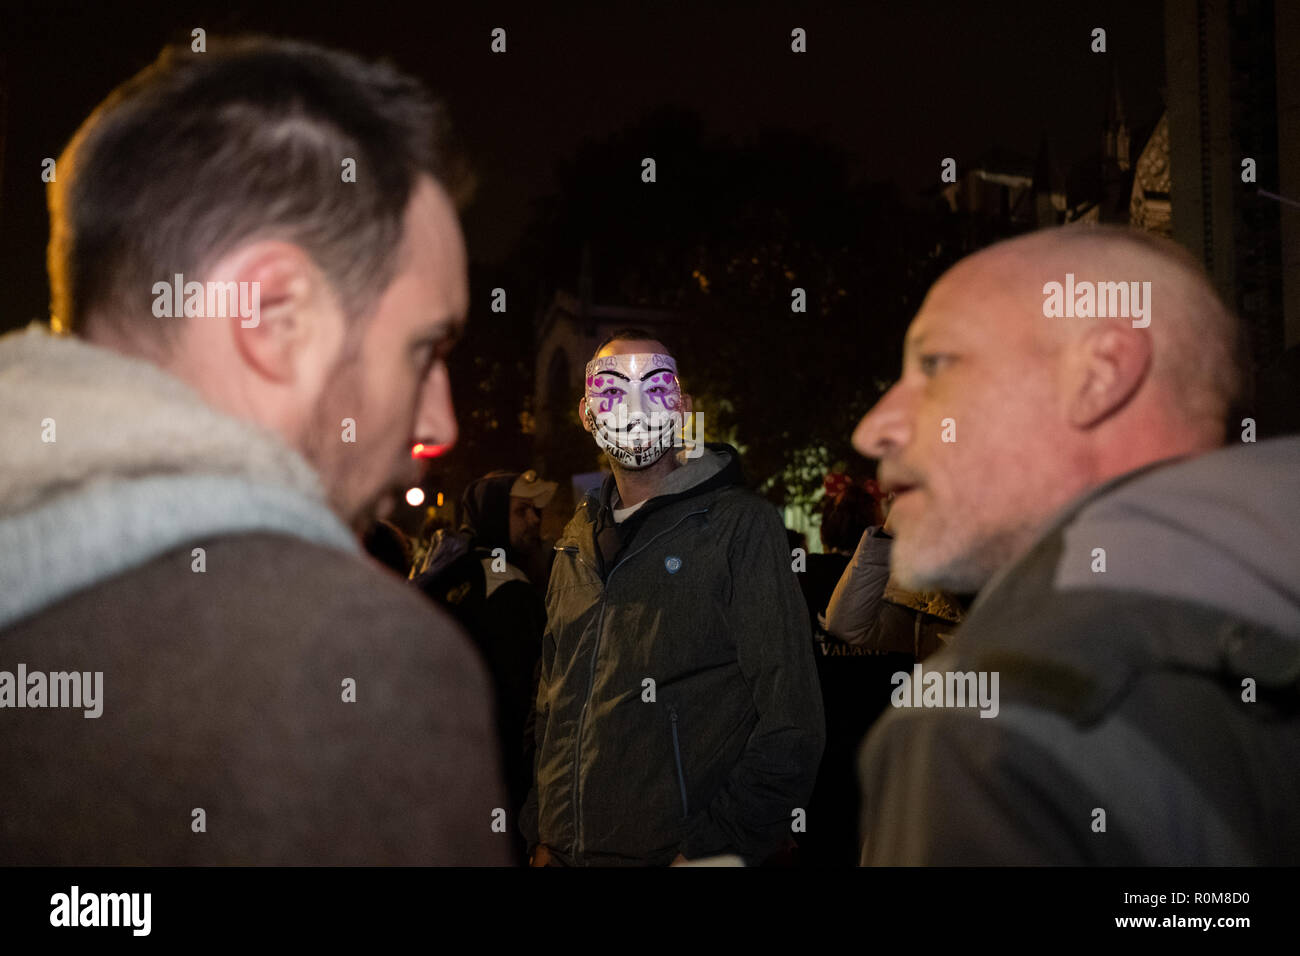 London, UK. 5th Nov 2018. Million Mask March rally in central London on the 5th November 2018 with Anonymus supporters wearing the iconic Guy Fawkes mask. Credit: Giovanni Strondl/Alamy Live News Stock Photo